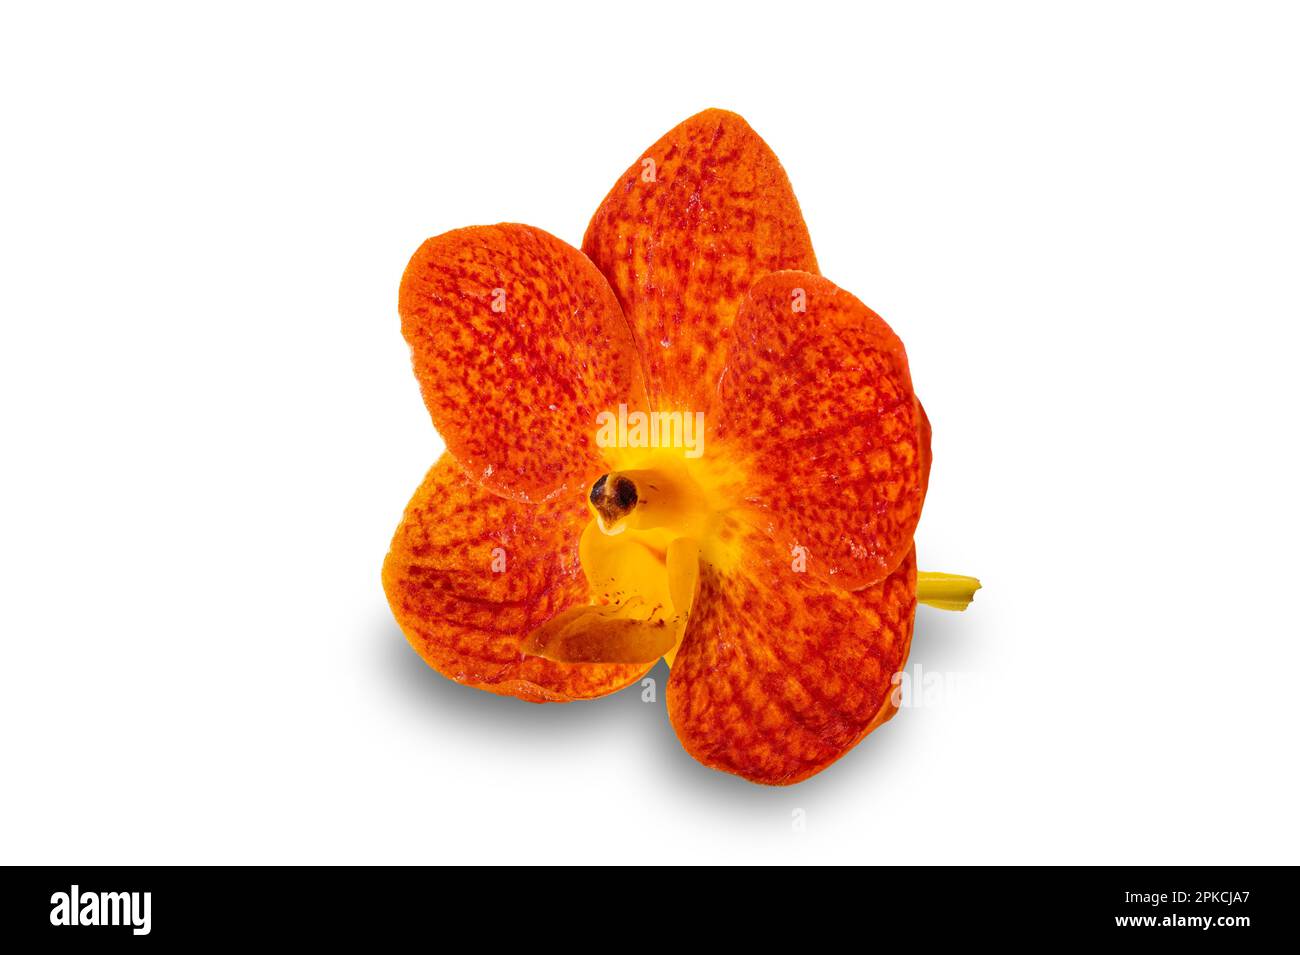 View of single blooming orange ascocentrum hybrid orchid flower isolated on white background with clipping path. Stock Photo